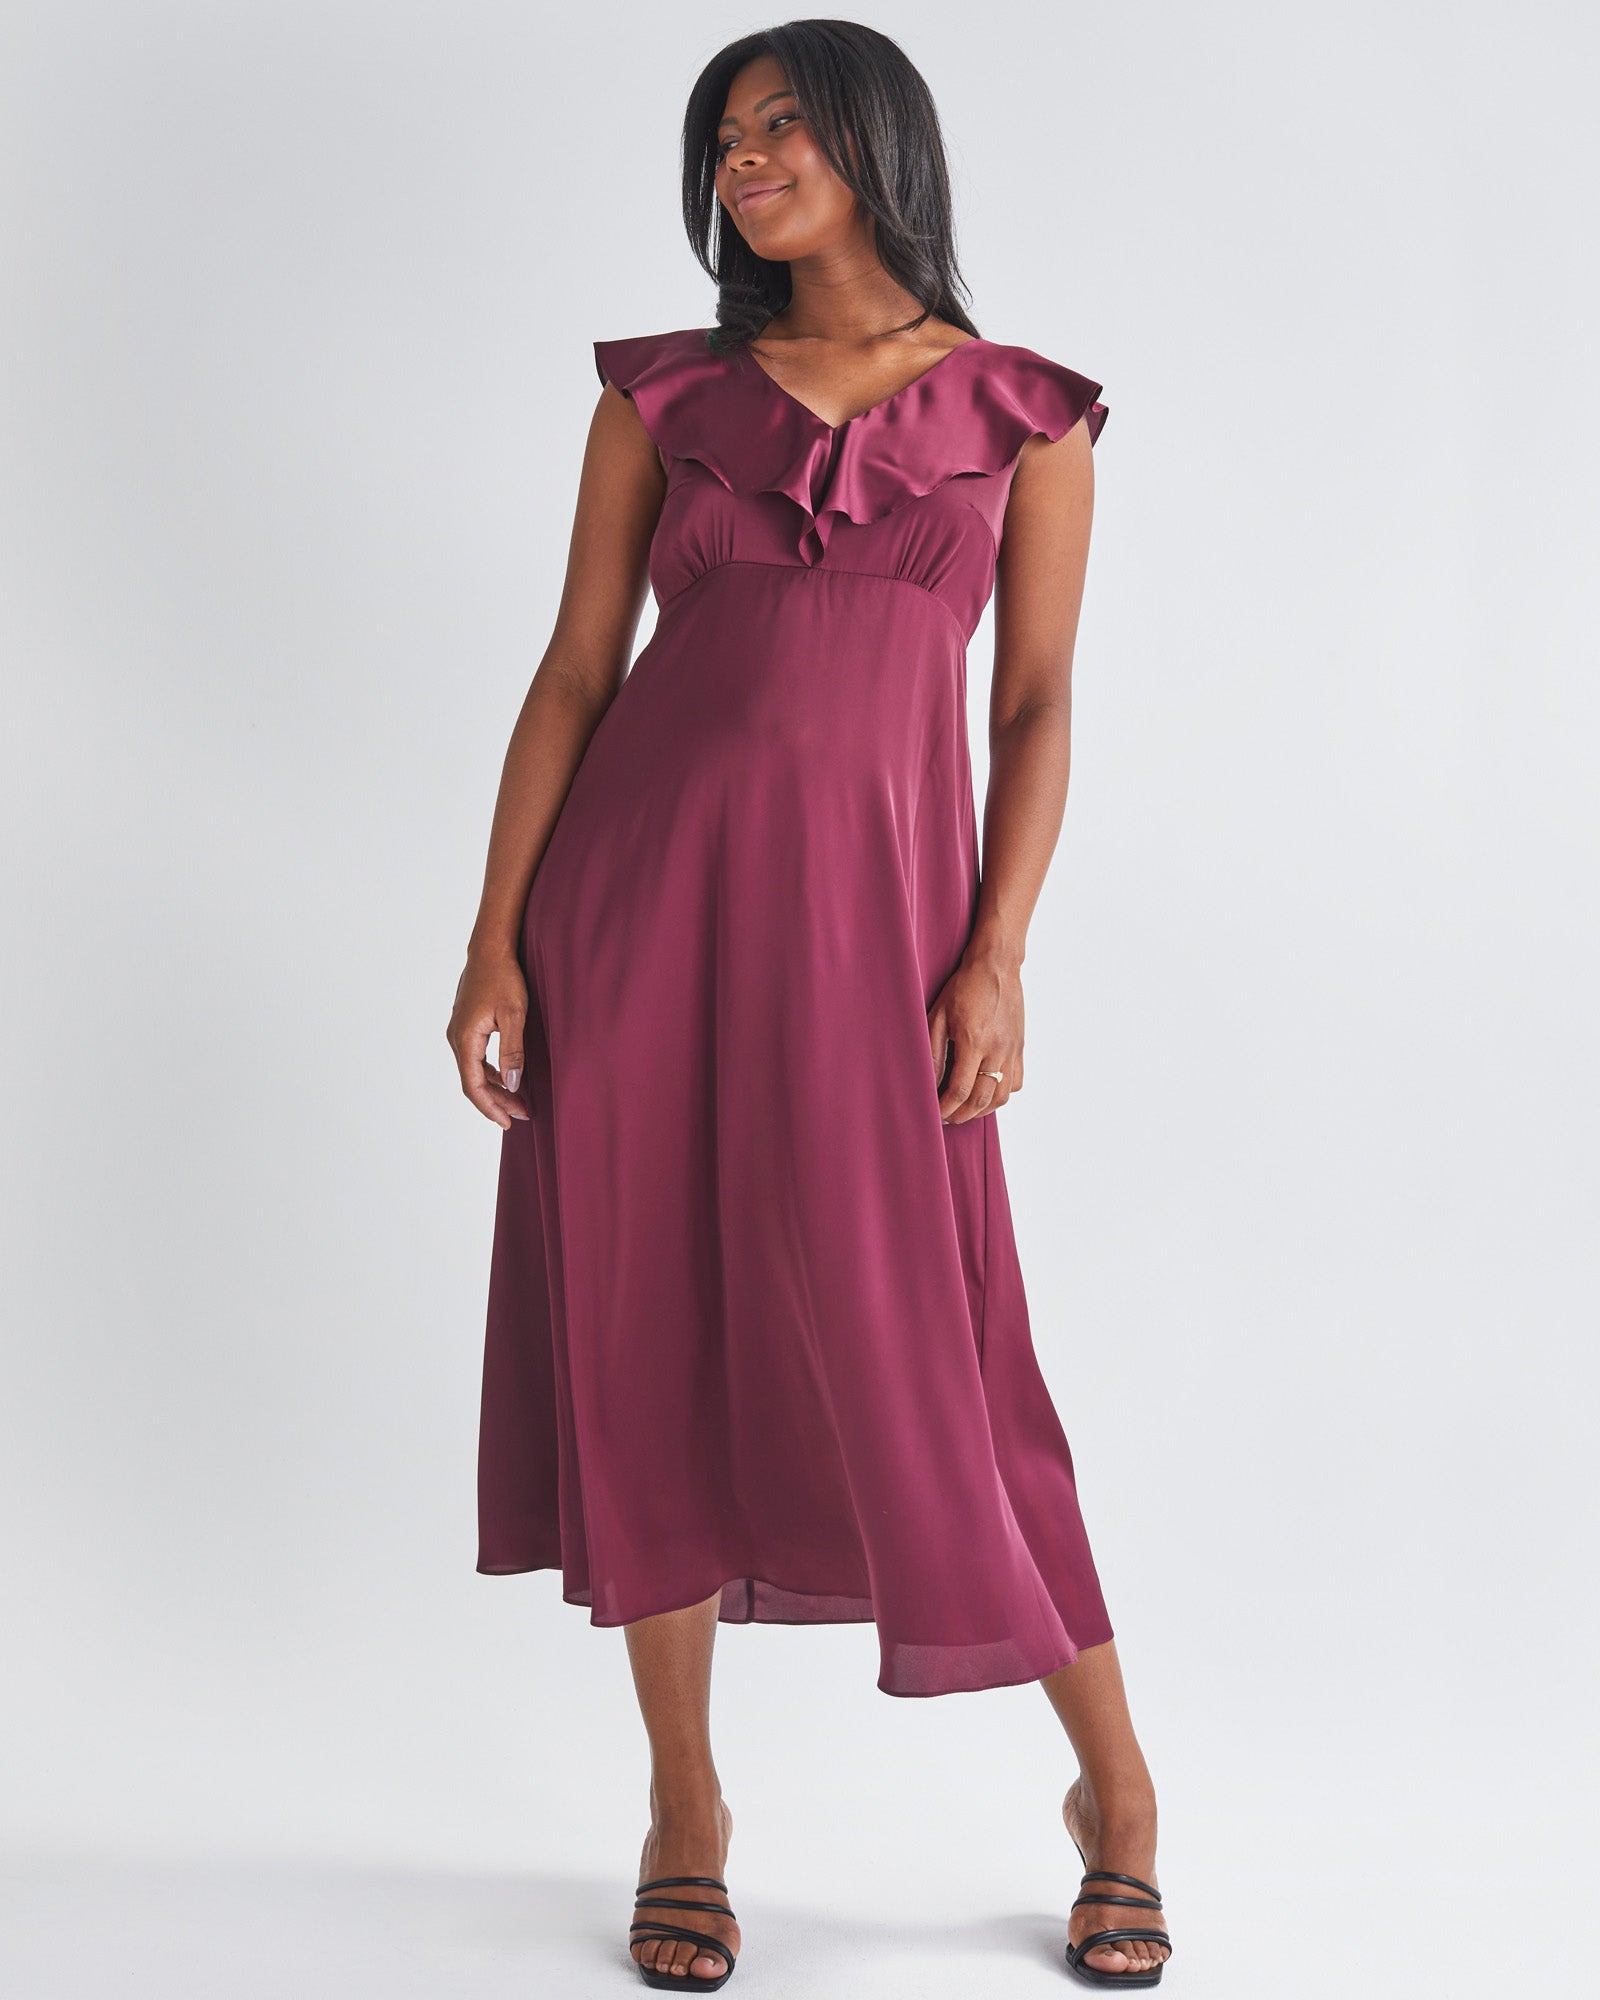 A smiling Pregnannt Woman Wearing Mika Maternity Evening Ruffle Dress in Wine from Angel Maternity